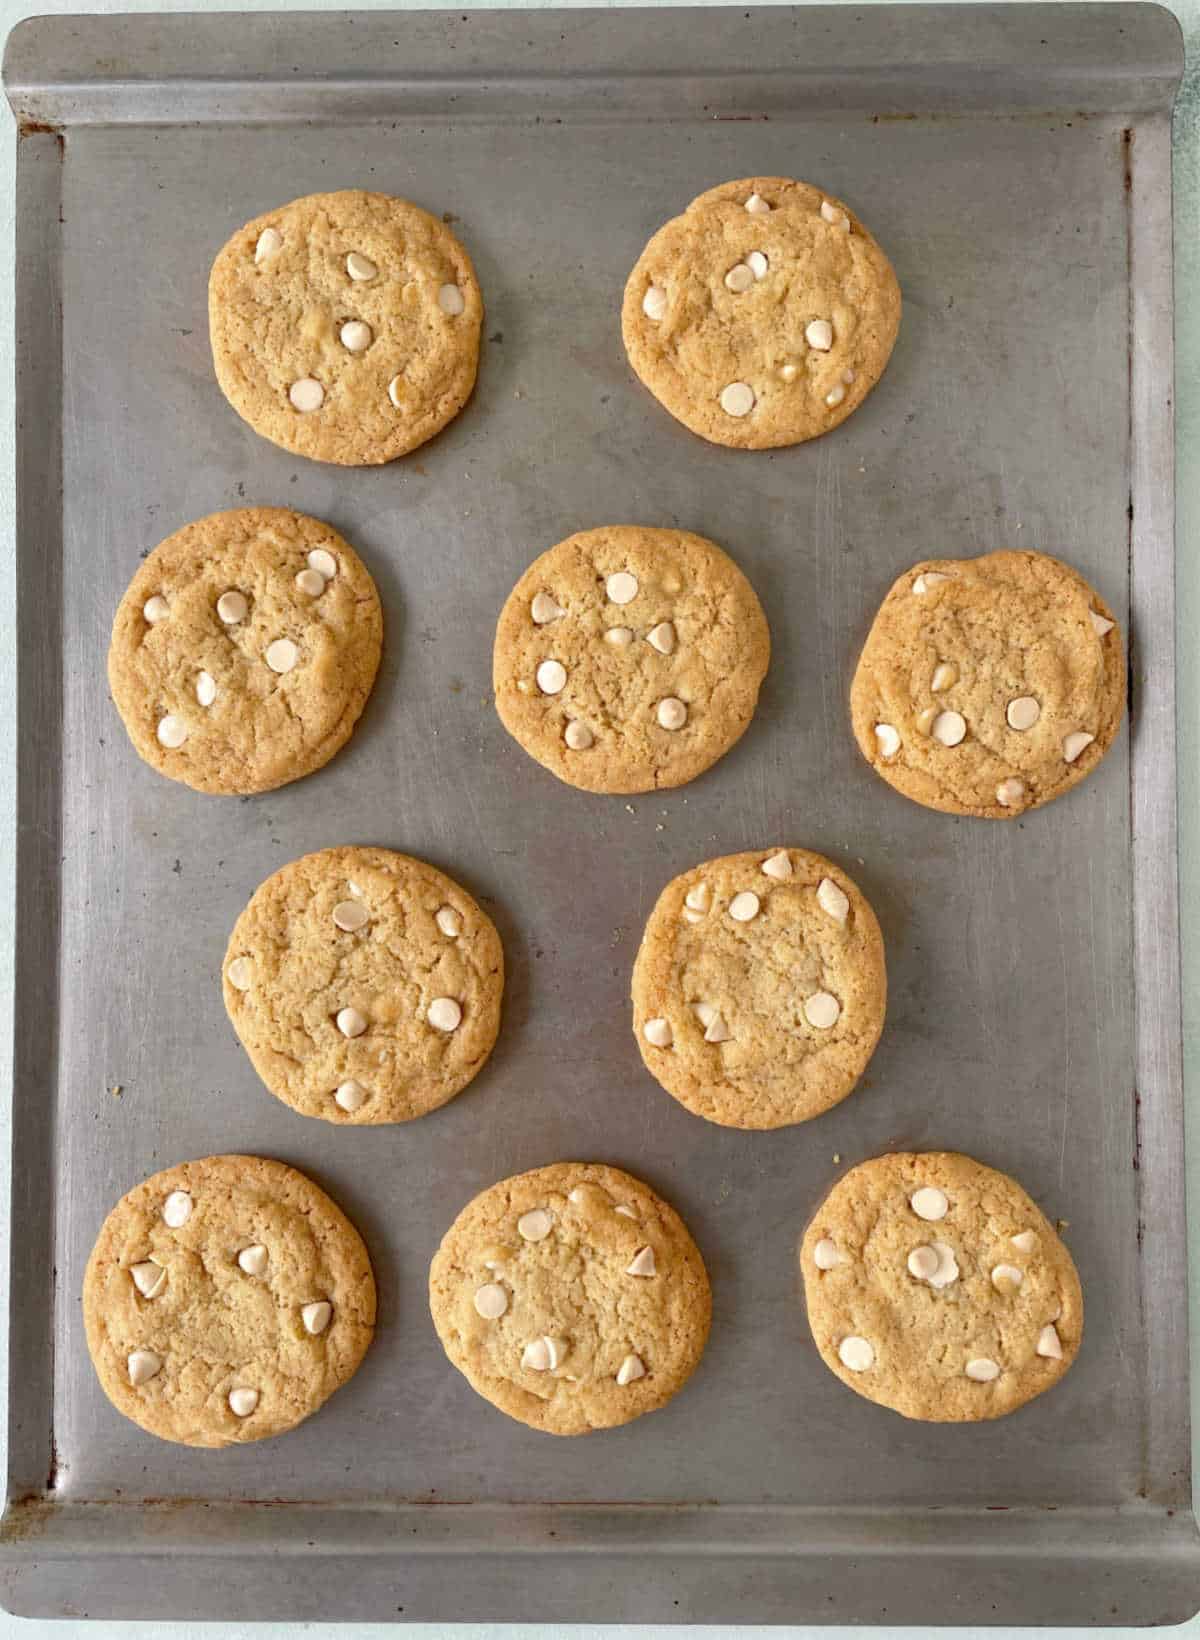 Top view of baked white chocolate chip cookies on metal baking sheet.